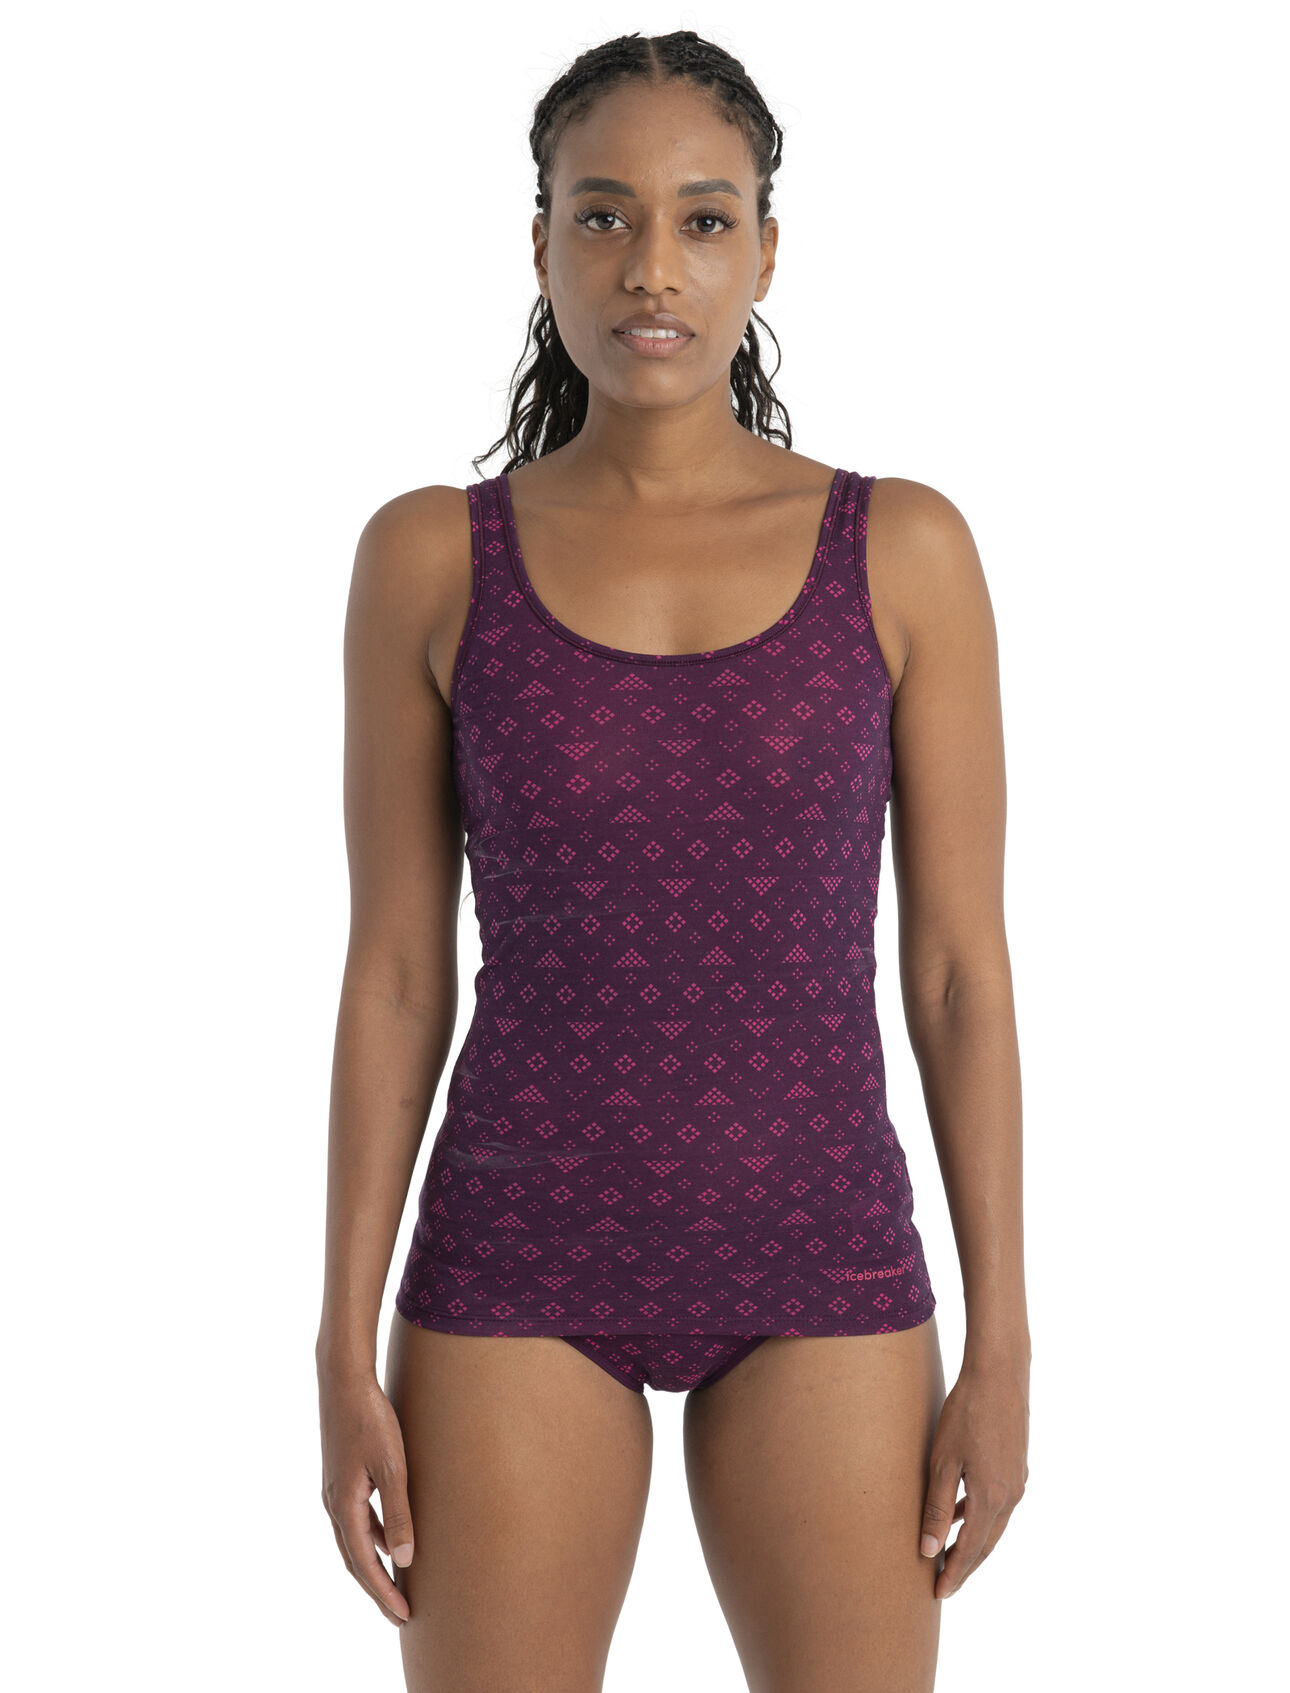 Womens Merino 150 Siren Tank First Snow An ultra-comfy underwear bottom for everyday wear, the 150 Siren Hipkini First Snow features our lightweight merino jersey Corespun fabric with a touch of LYCRA® for stretch. The unique winter pattern draws inspiration from the angular, crystalline shapes of snowflakes.